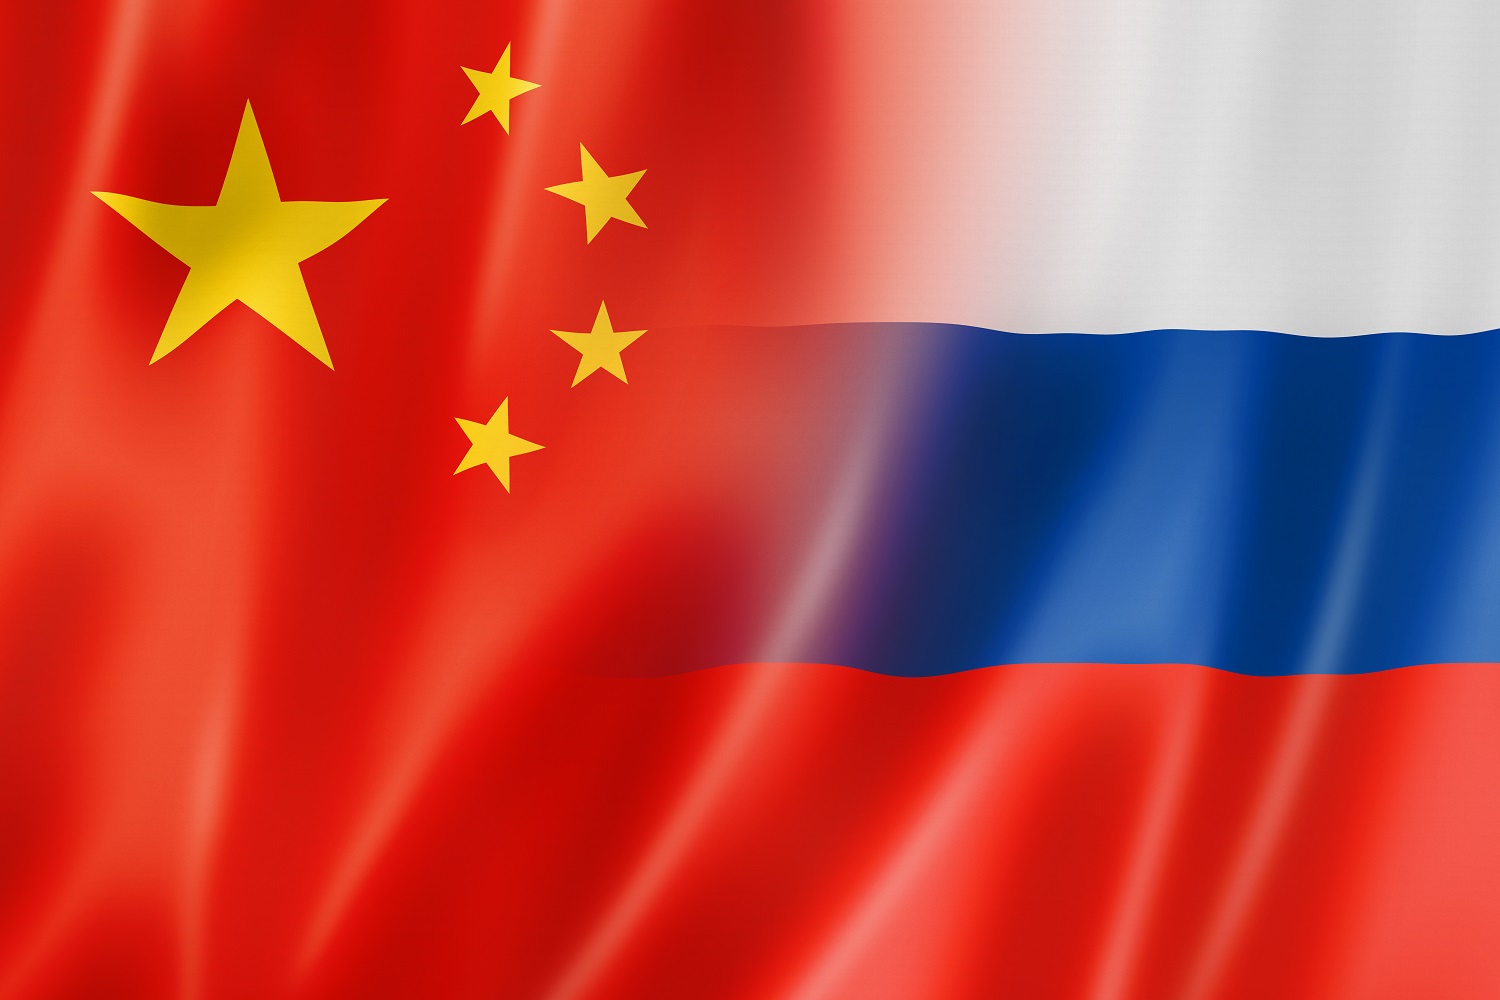 The flags of China and Russia mix with each other.